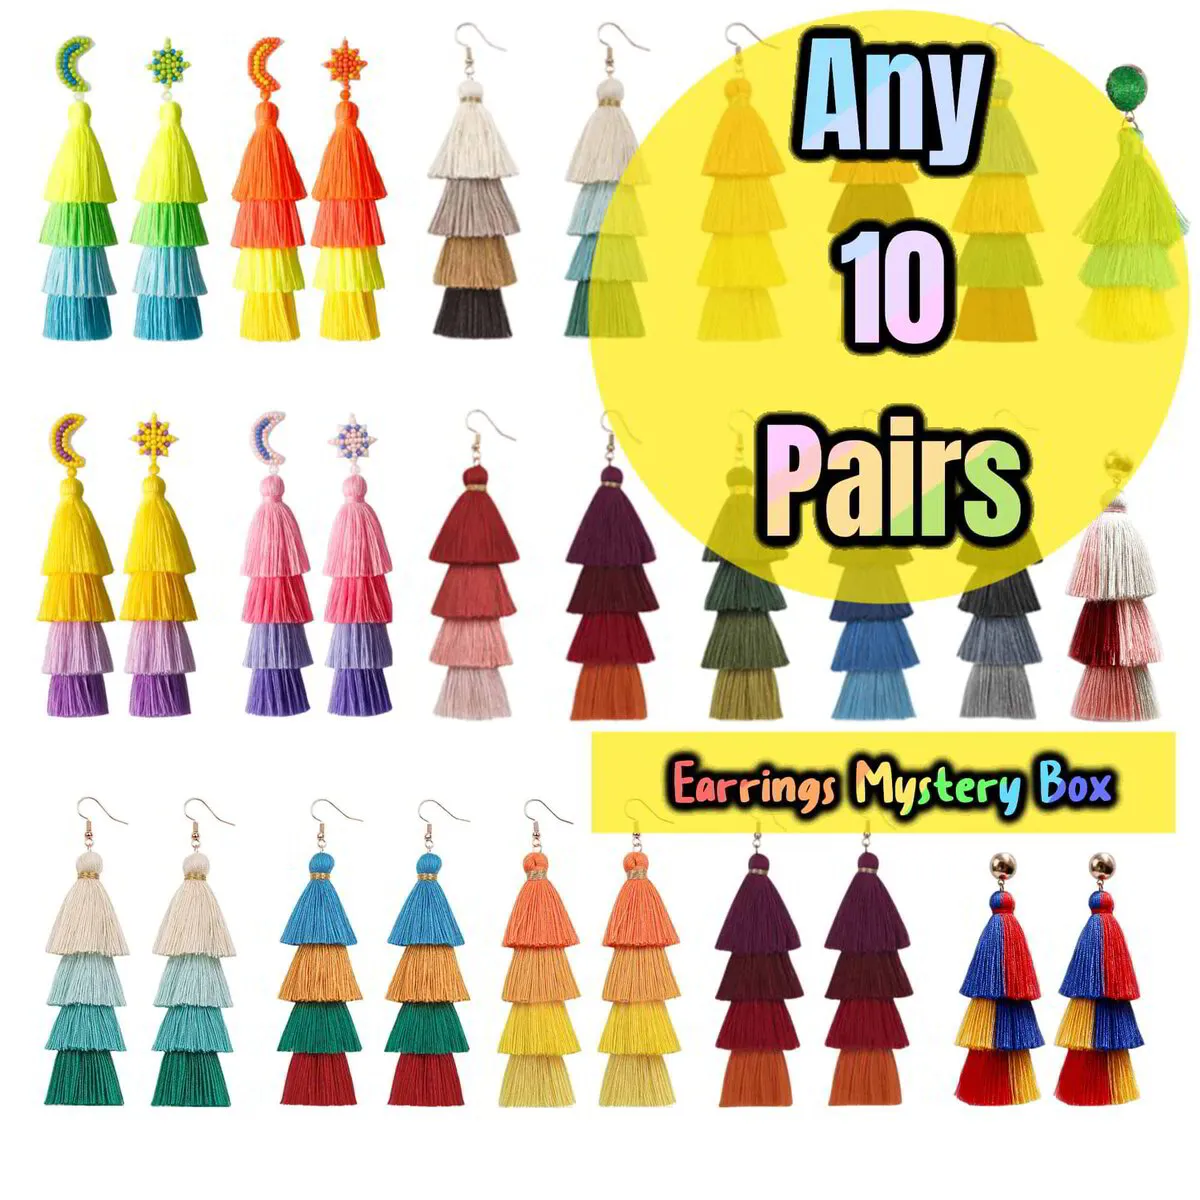 Earrings MYSTERY BOX 10 Pairs Ideal Gifts for Women